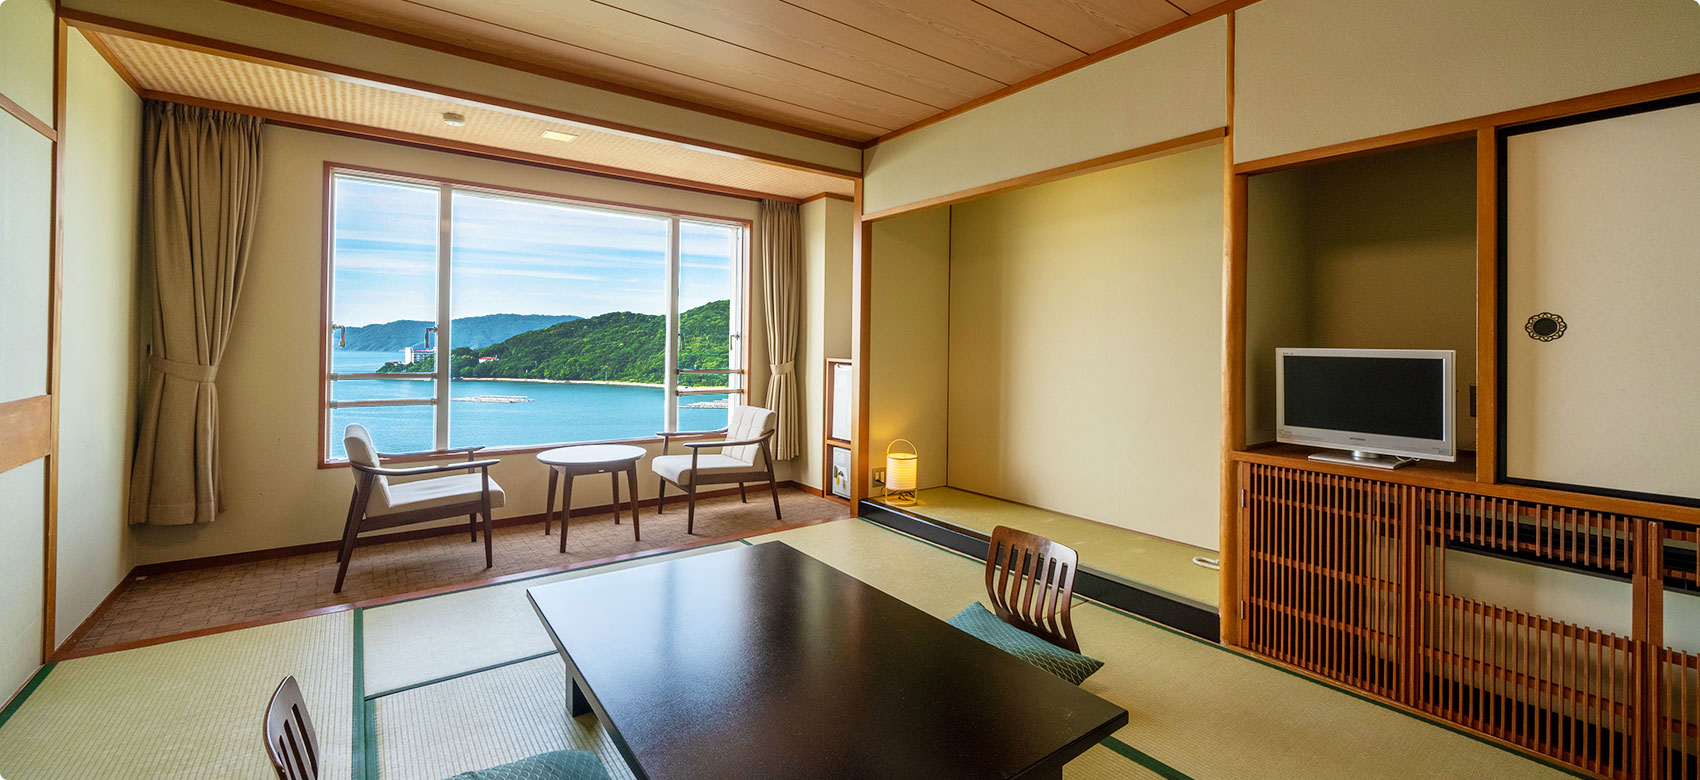 Toba Seaside Hotel Official Site The Onsen Resort Hotel Of Toba Mie Prefecture Ise Shima